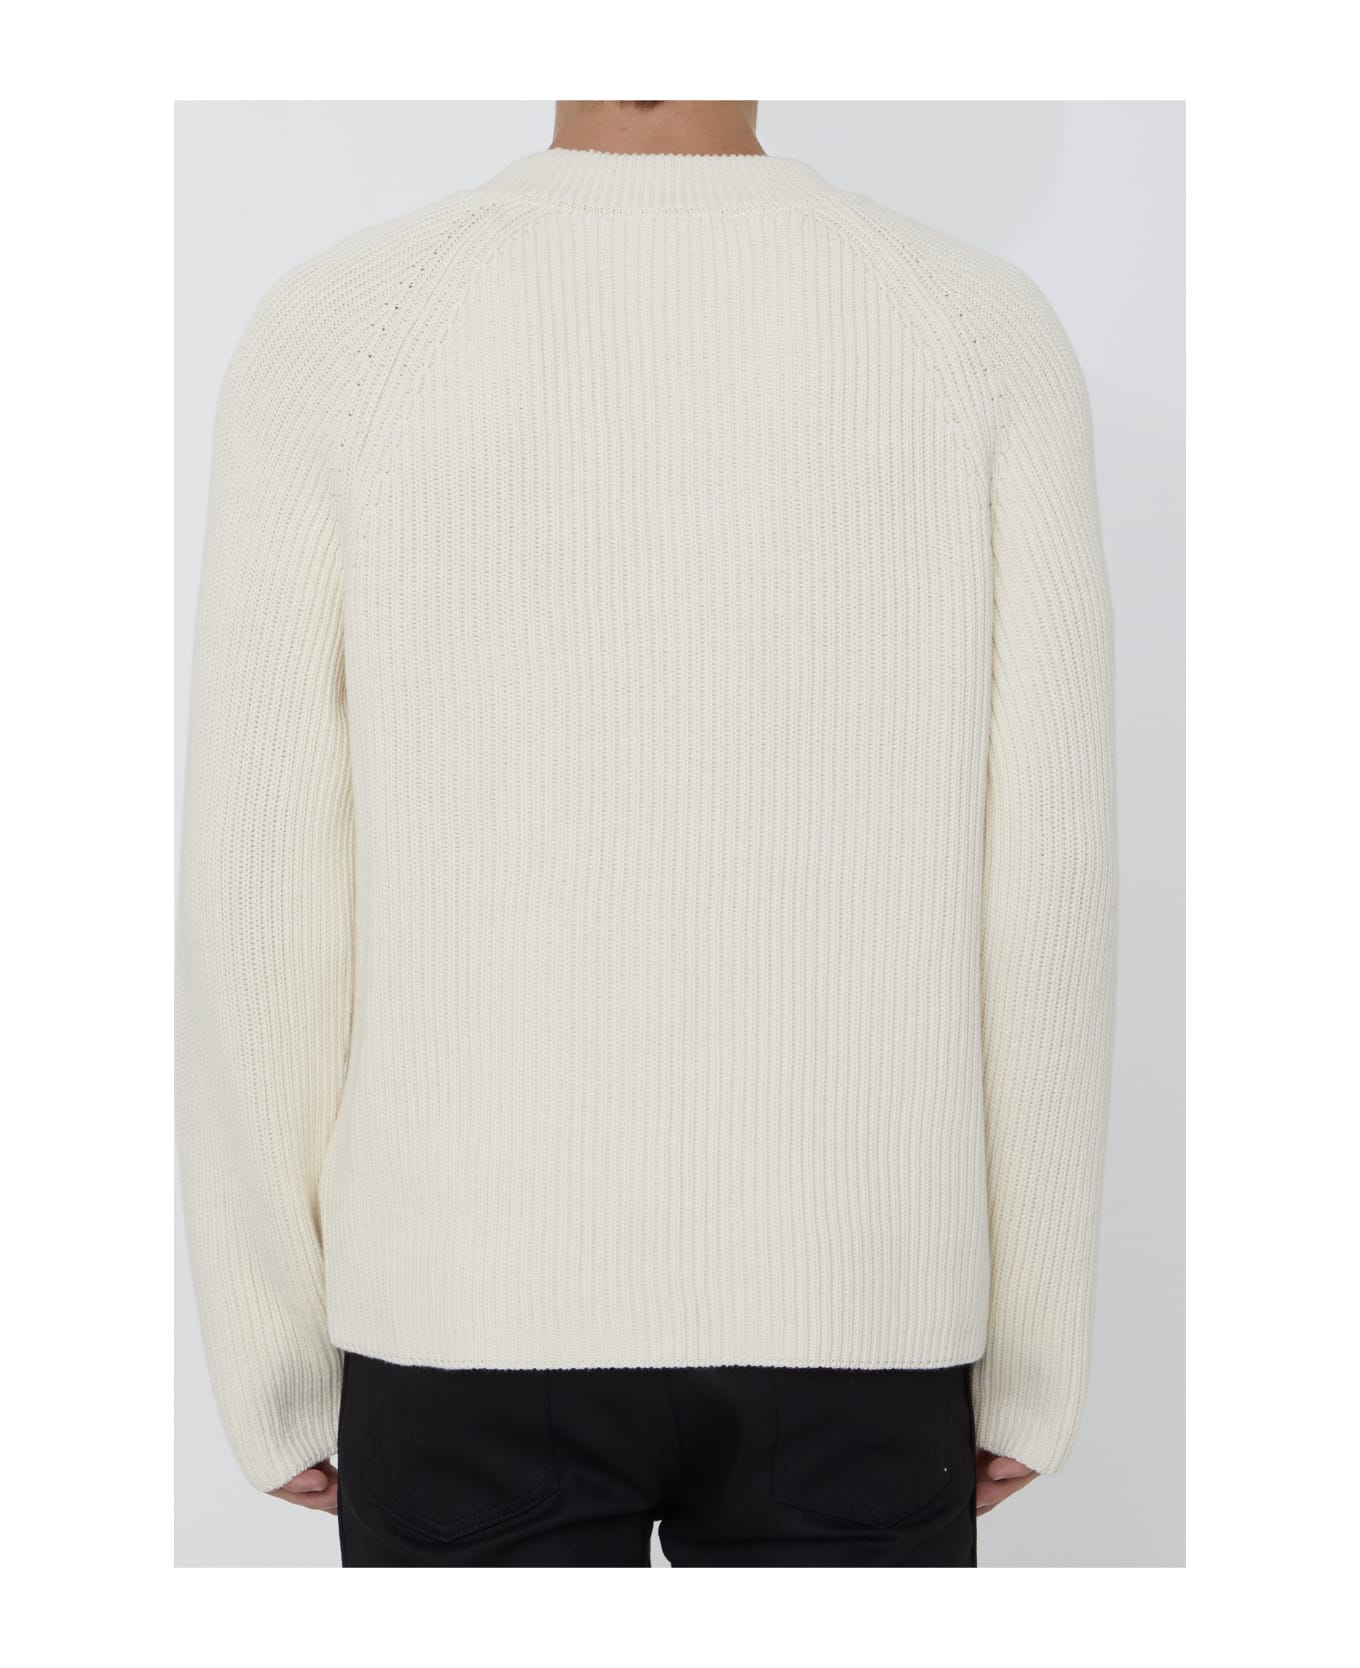 Ami Alexandre Mattiussi Ivory Jumper With Patch - IVORY ニットウェア